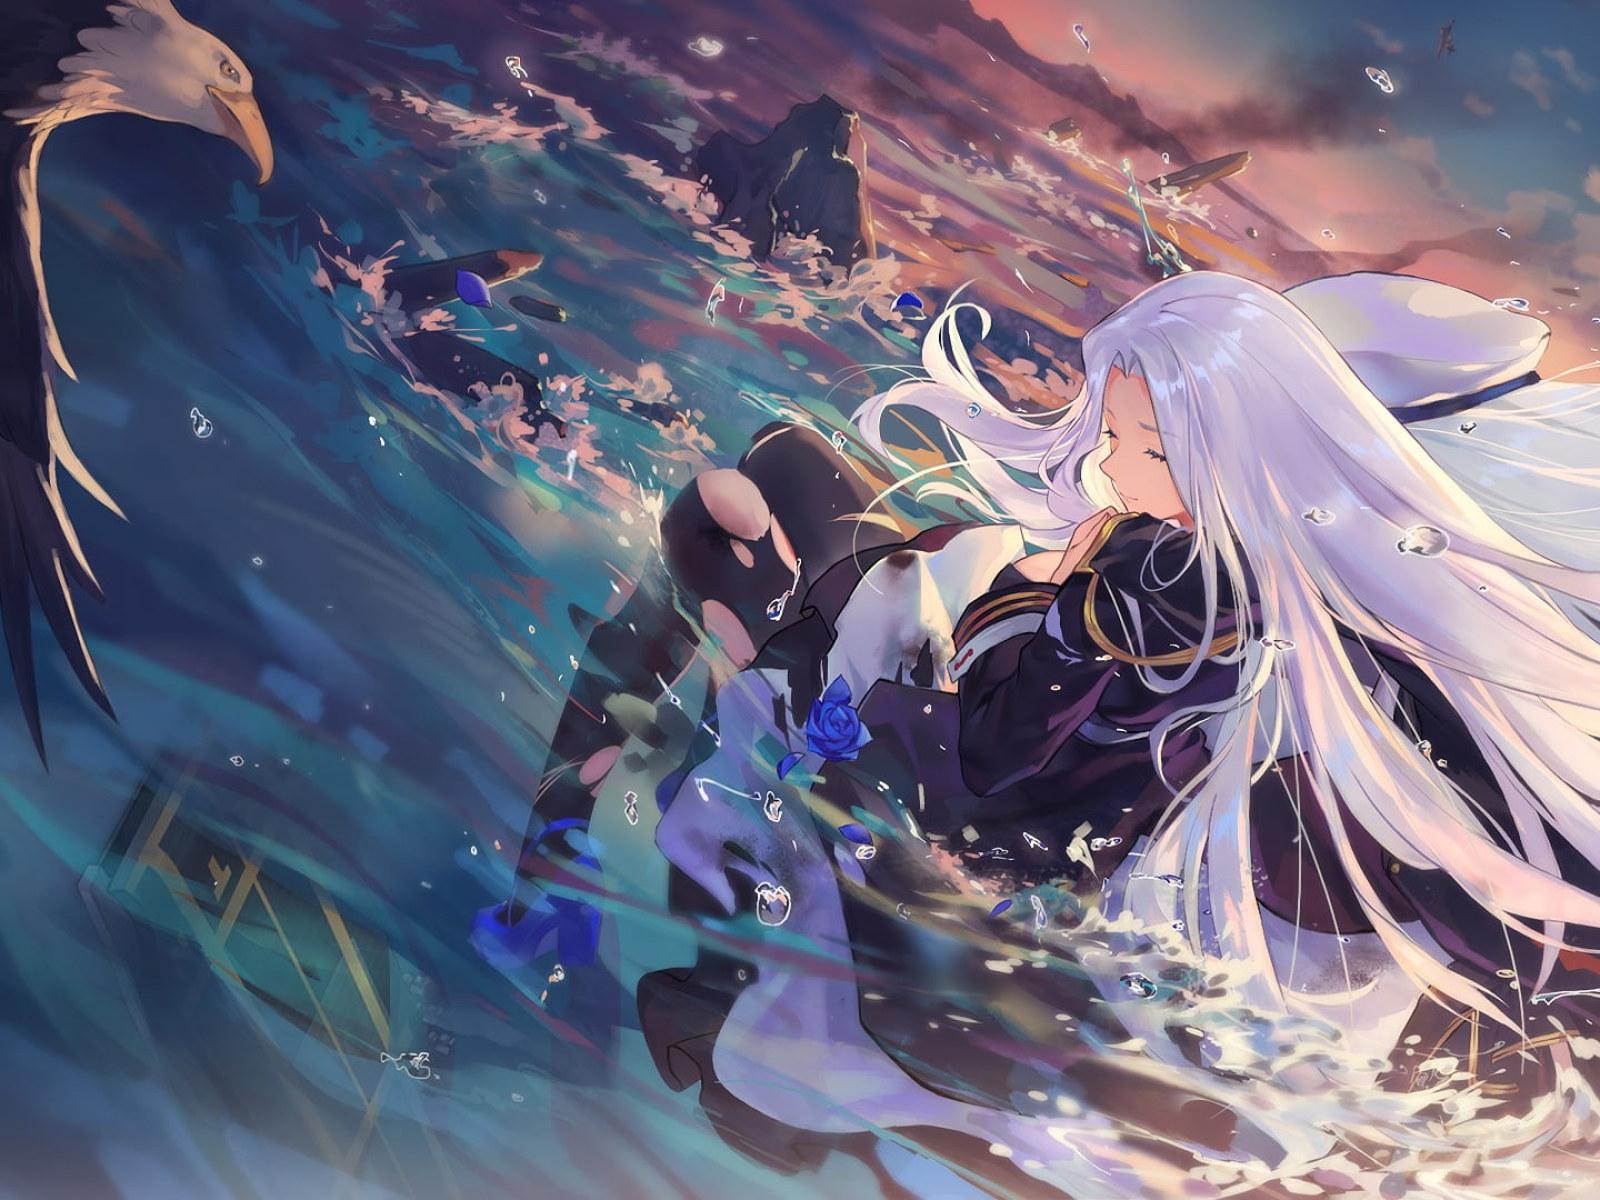 White Hair Anime Wallpapers - Top Free White Hair Anime Backgrounds ...